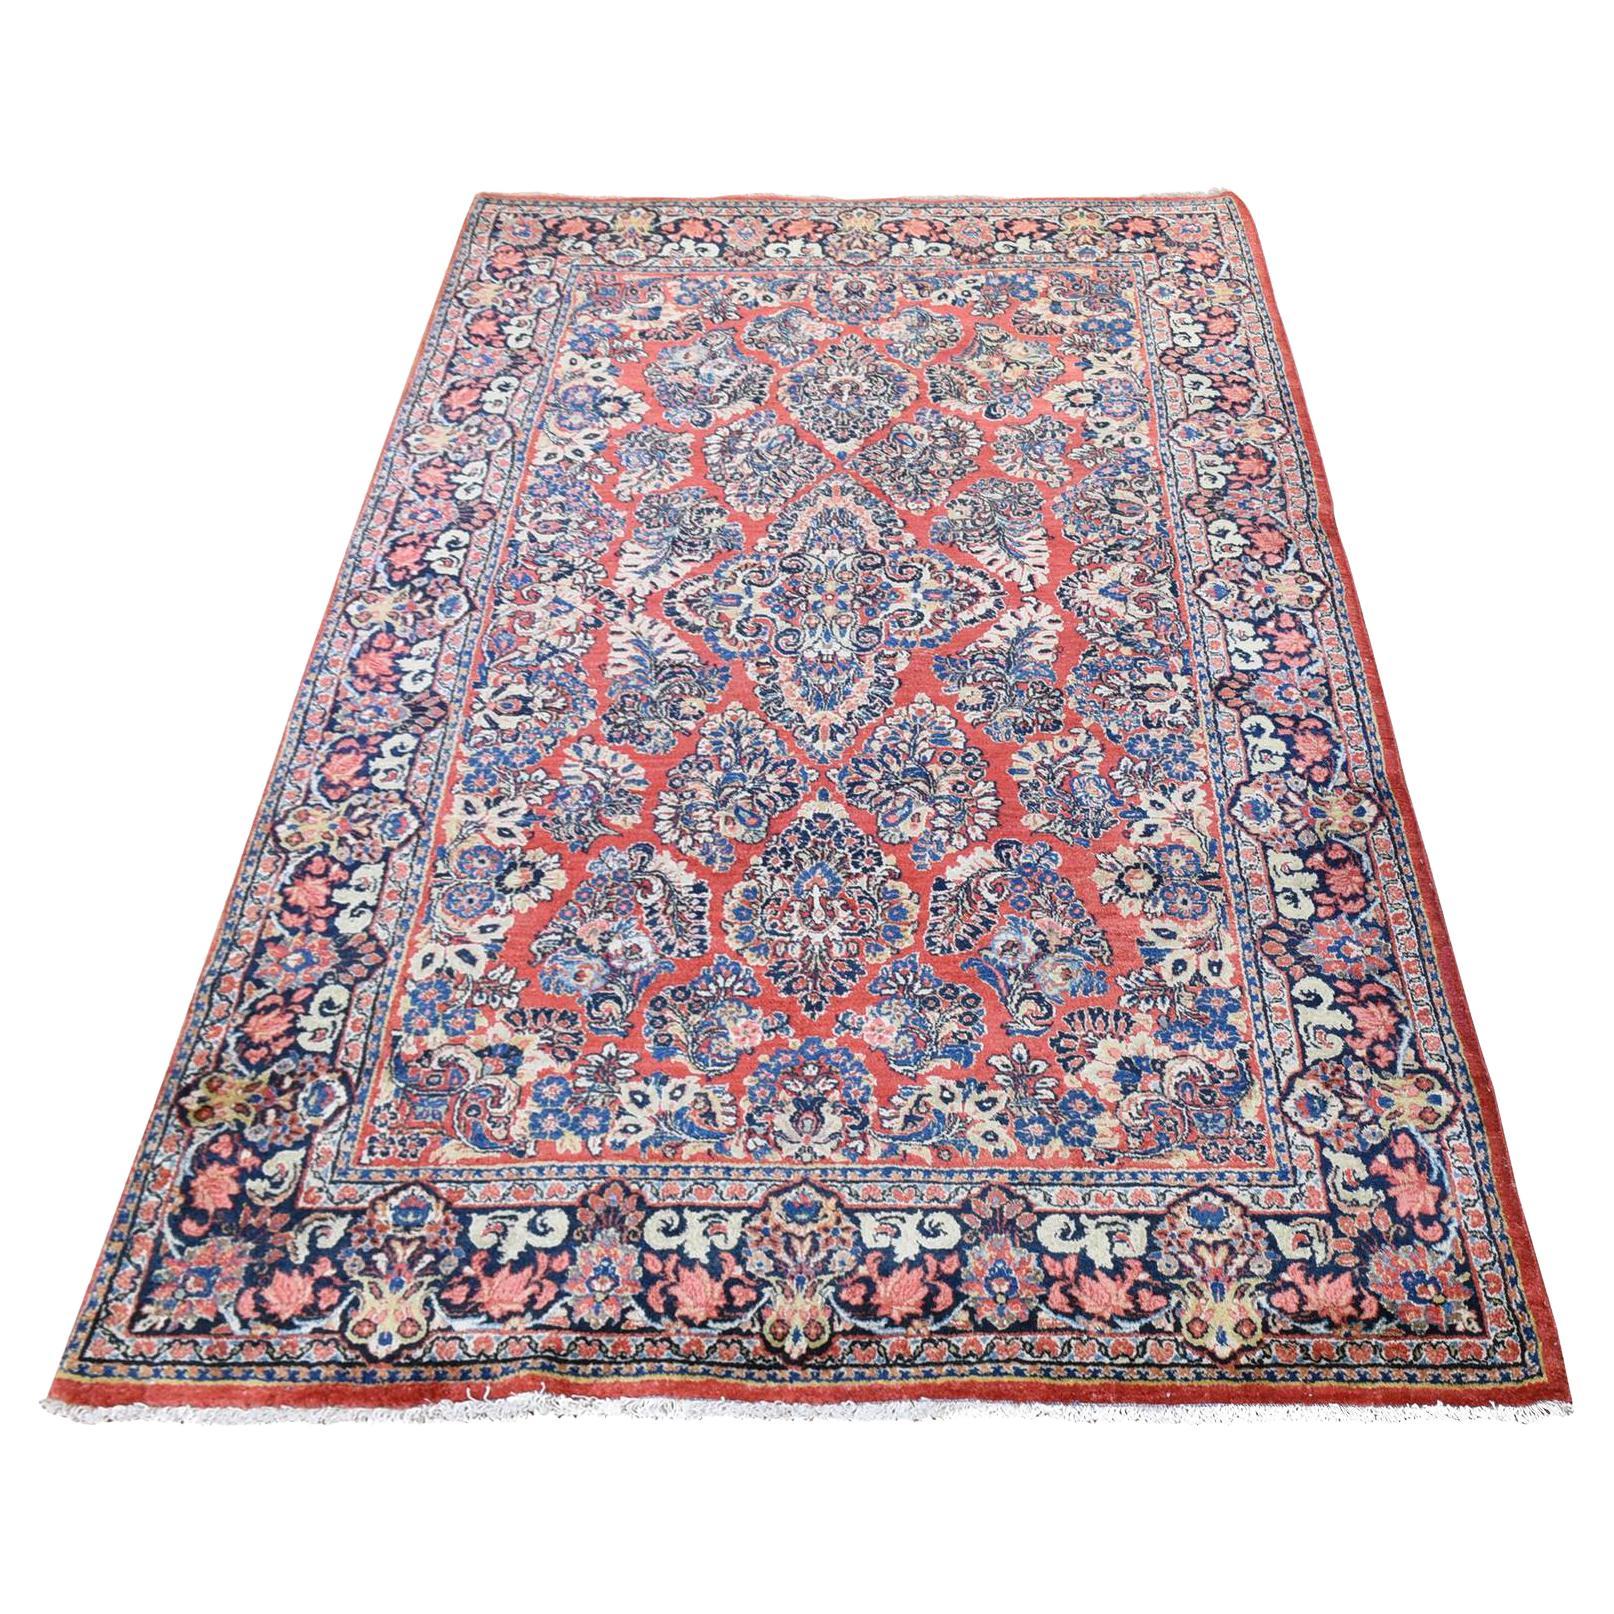 Brick Red Antique Persian Sarouk Full Pile Clean and Soft, Hand Knotted Wool Rug For Sale